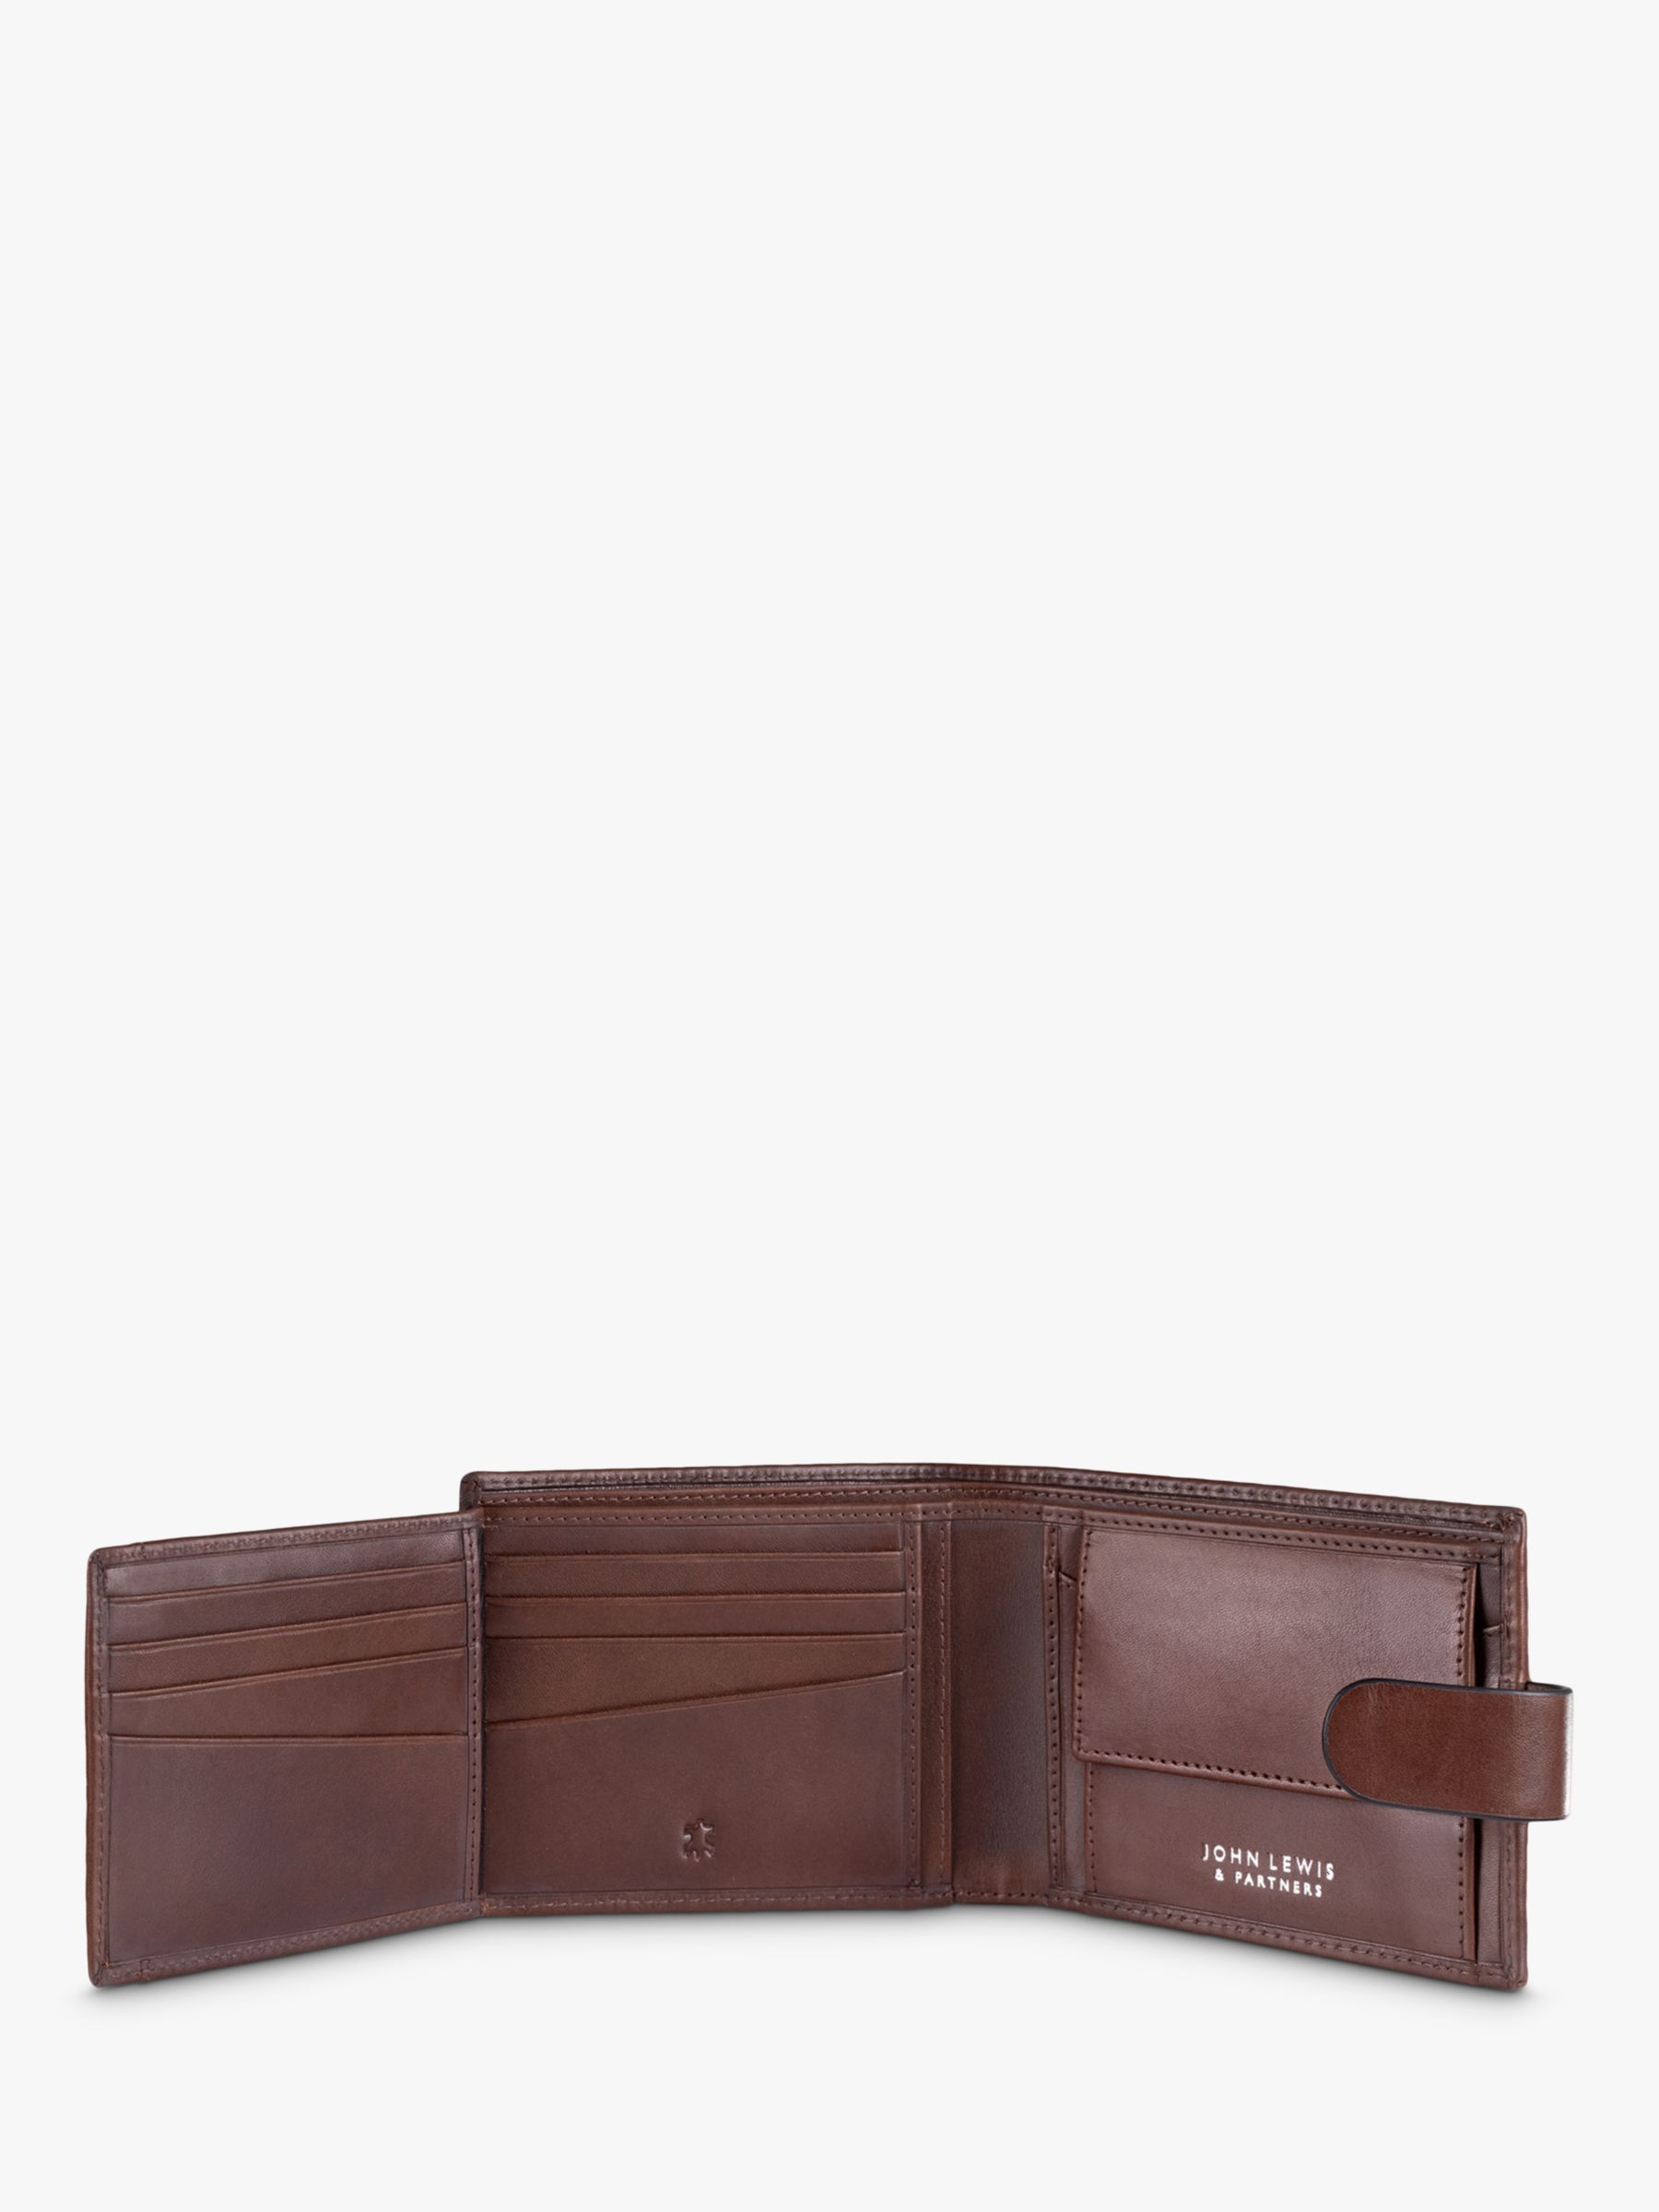 John Lewis Vegetable Tanned Leather Card Coin Flip Wallet, Brown